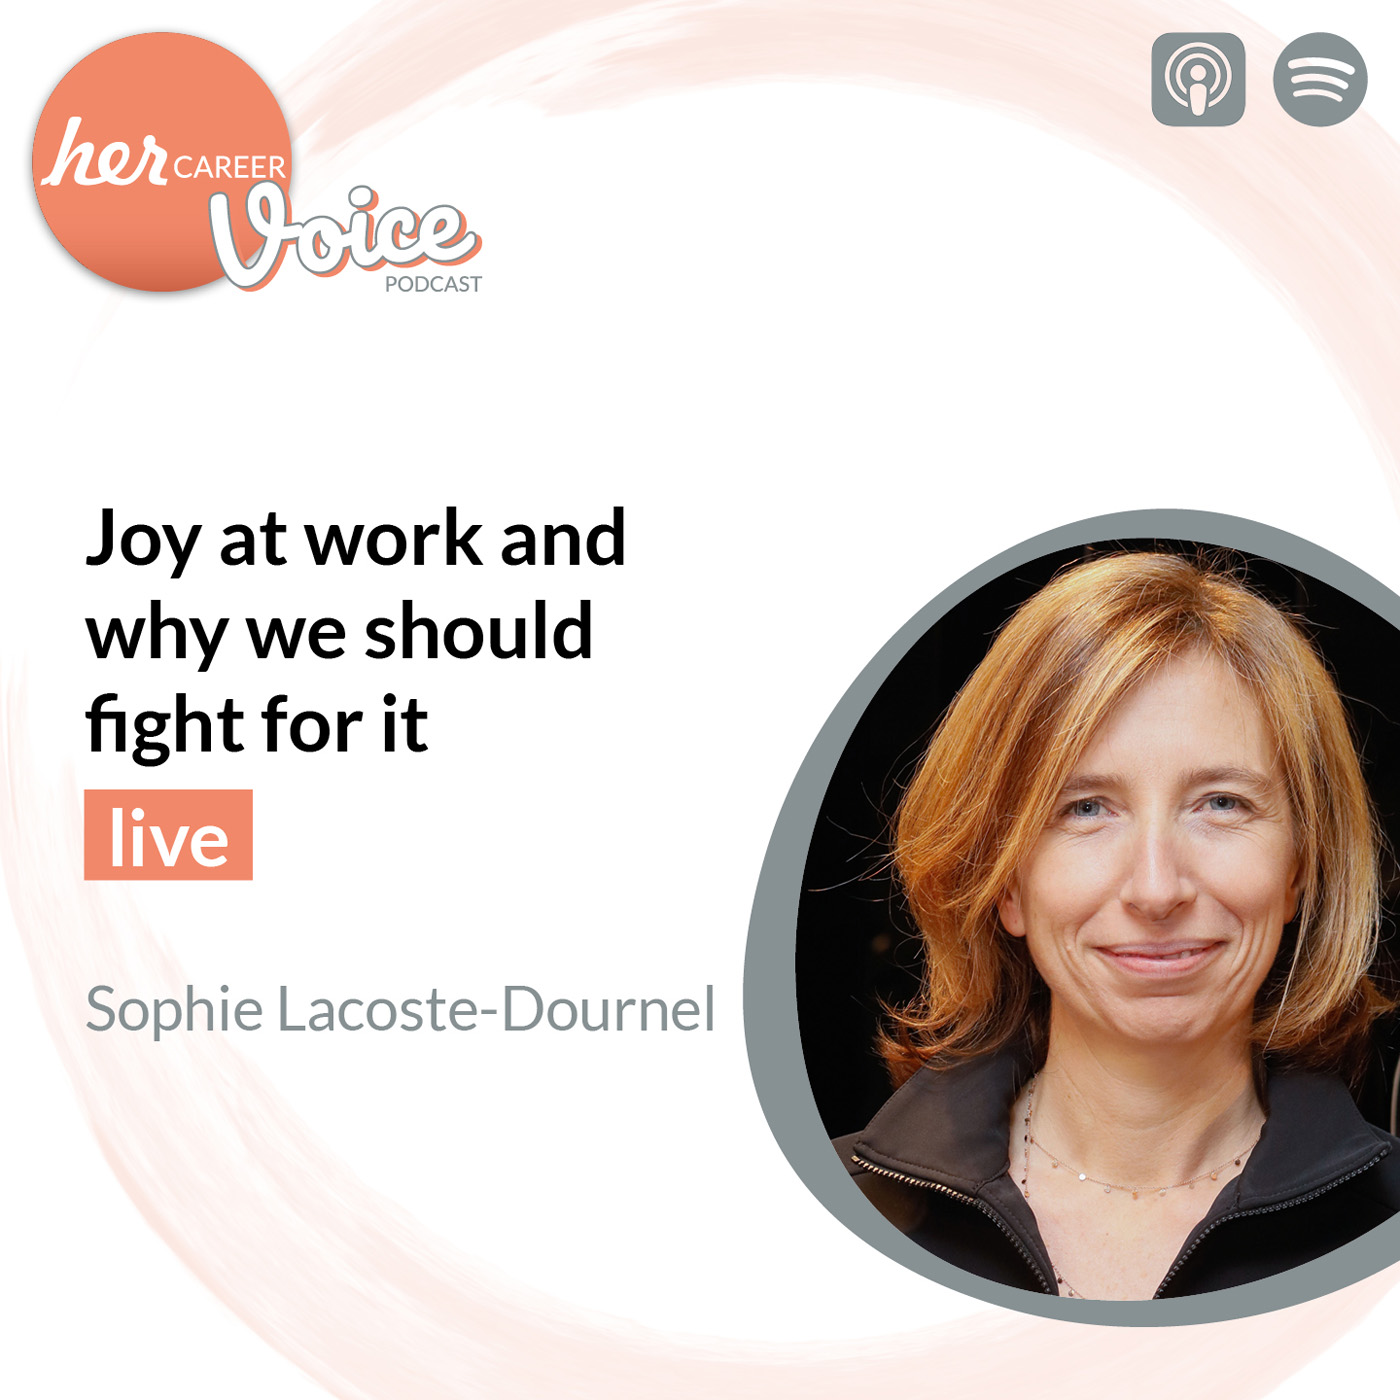 Sophie Lacoste: Joy at work and why should fight for it - herCAREER Voice Podcast